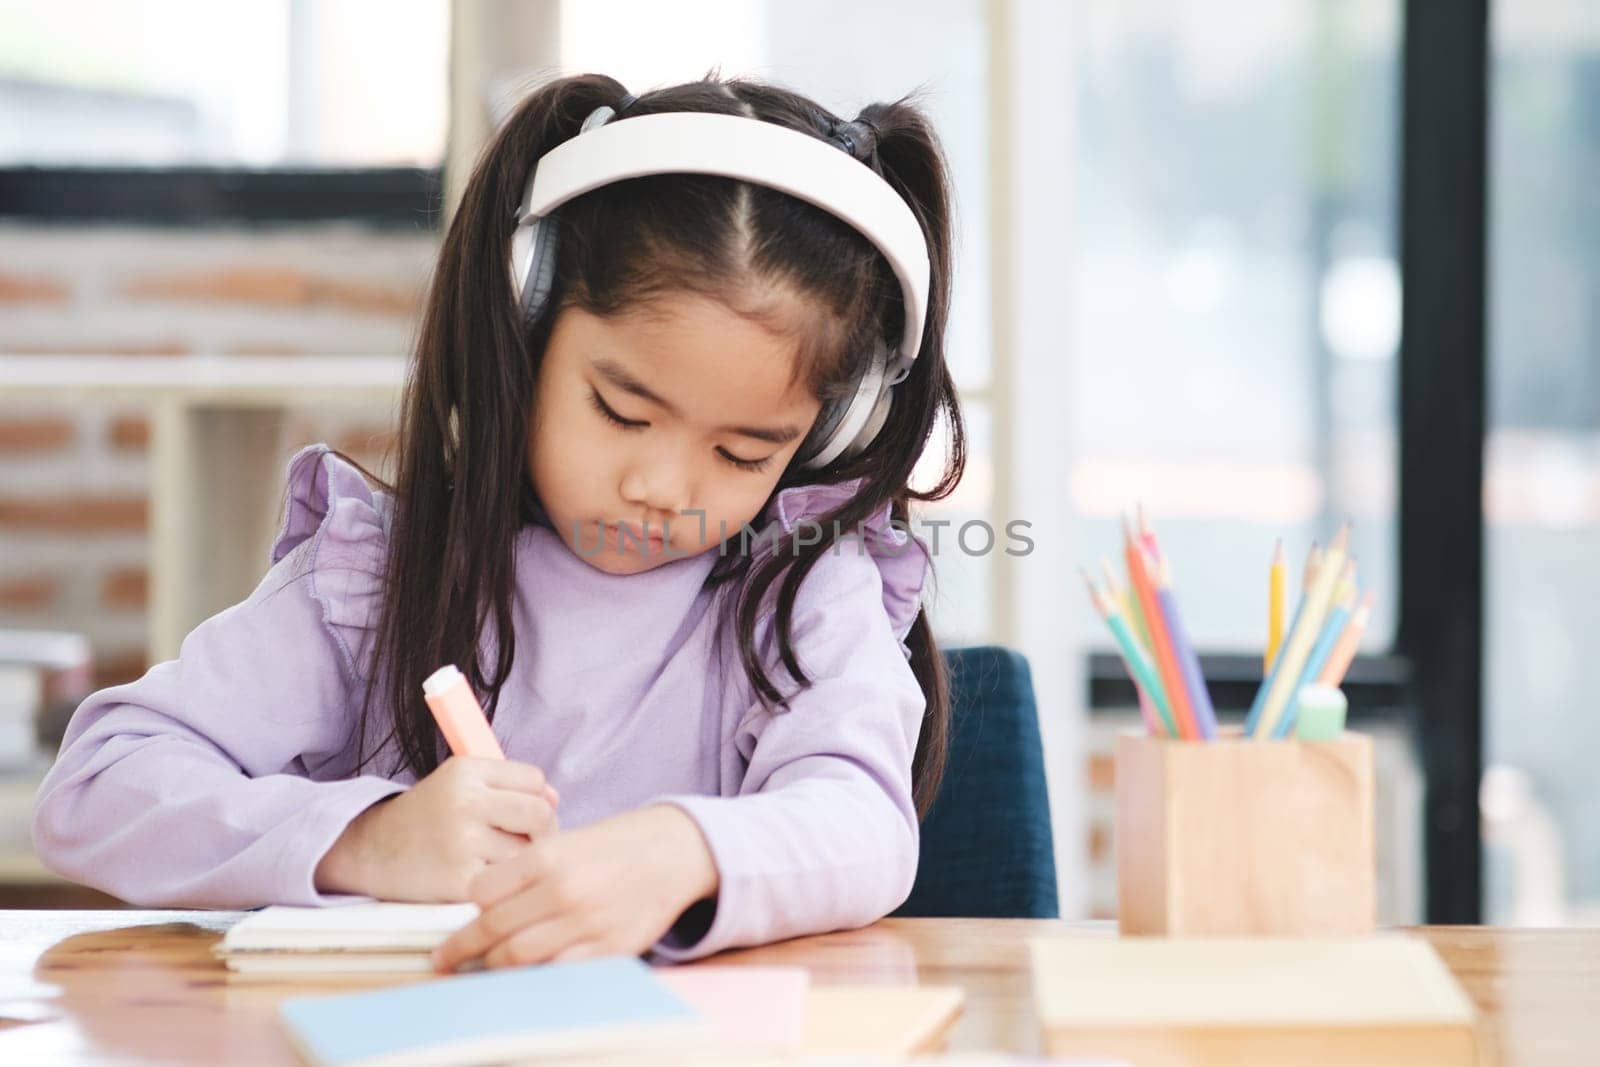 A young girl is sitting at a desk and writing in a notebook by ijeab